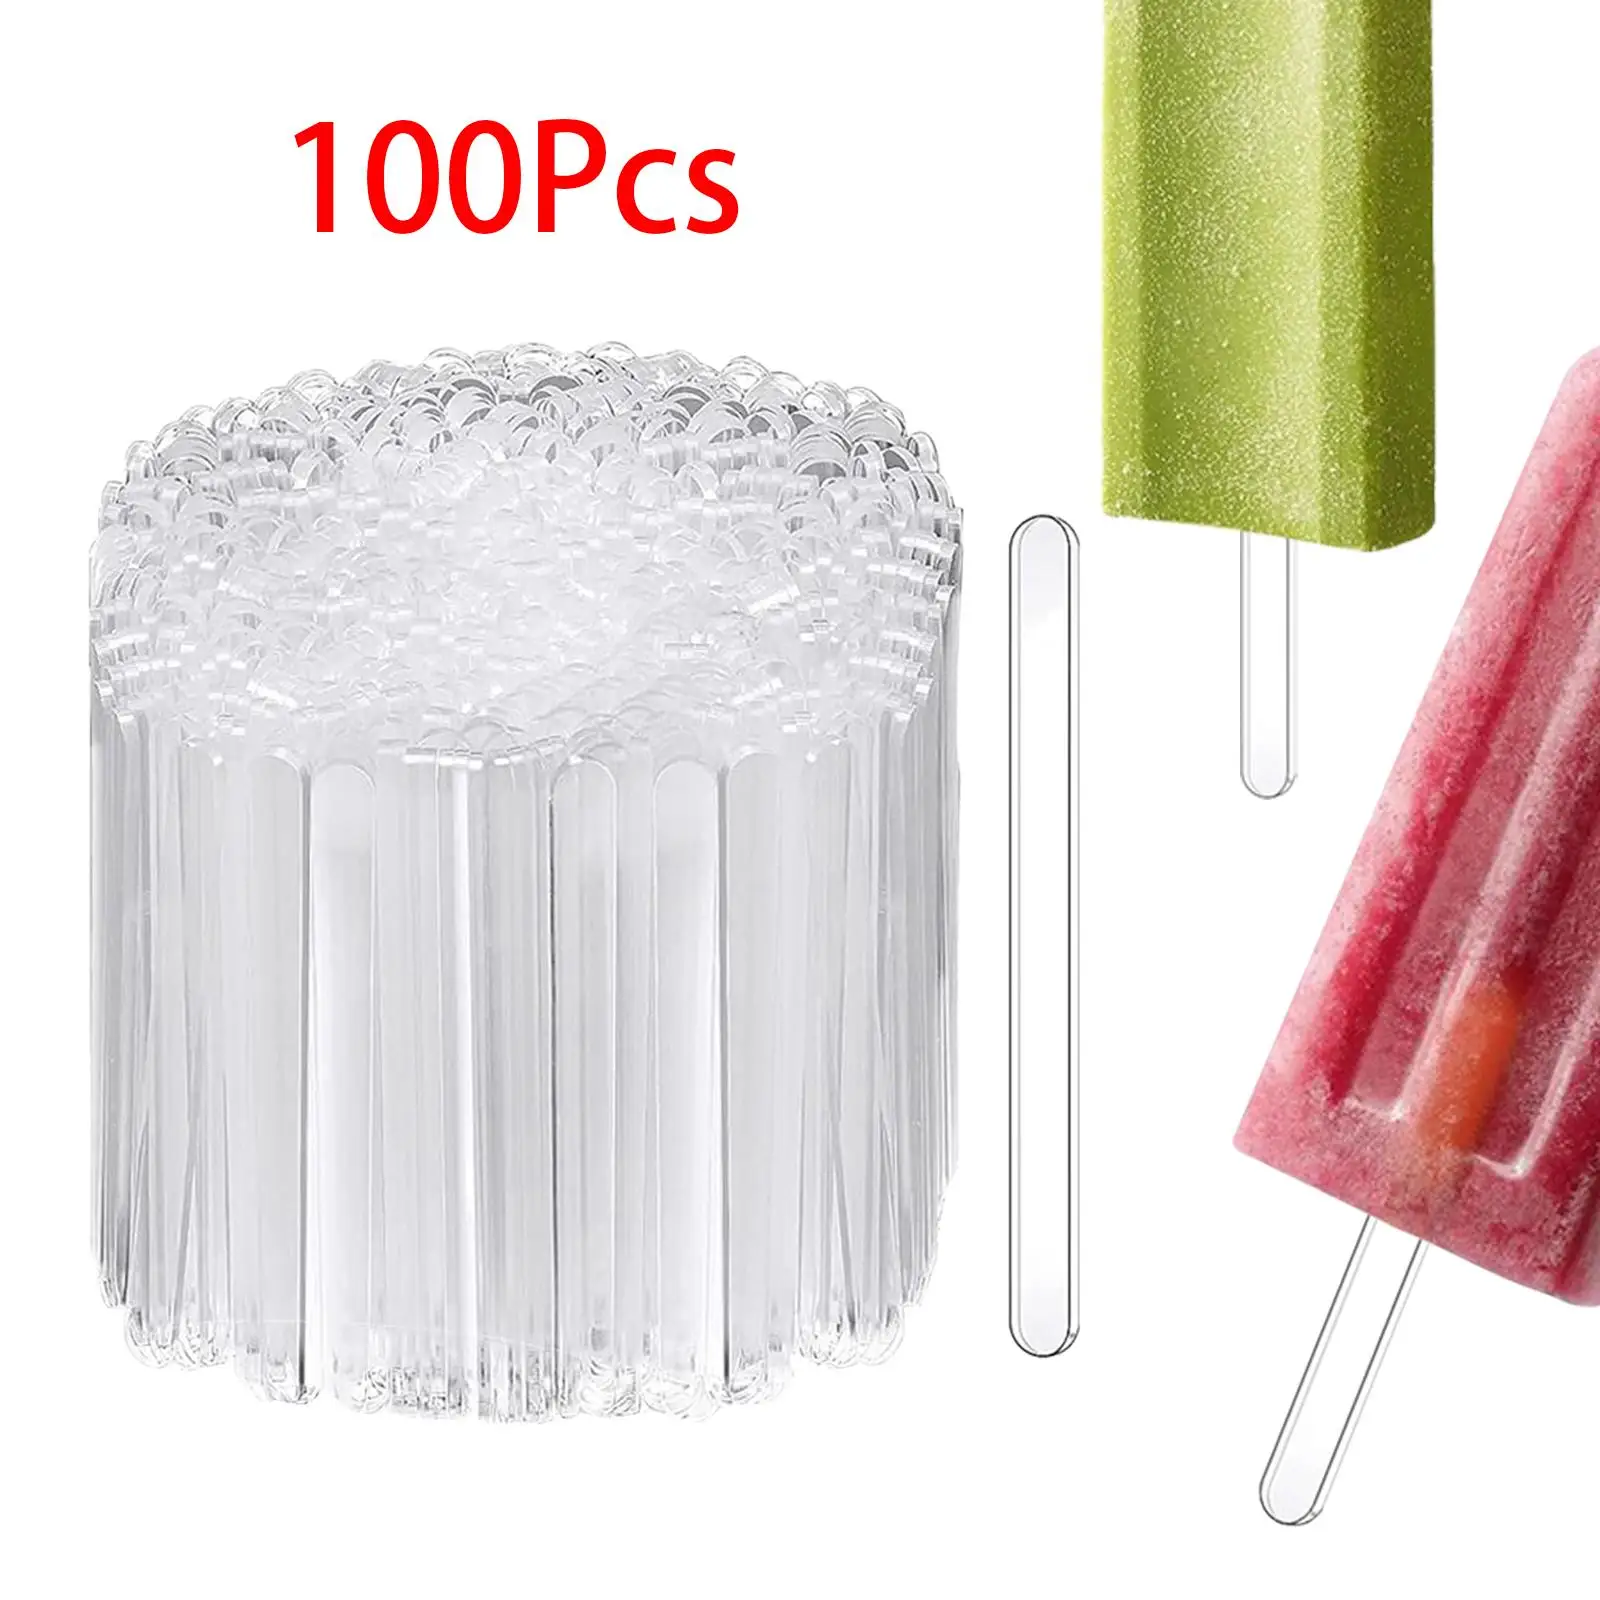 100 Pieces Popsicle Sticks Acrylic Ice Bar Sticks for Party DIY Crafts Snack